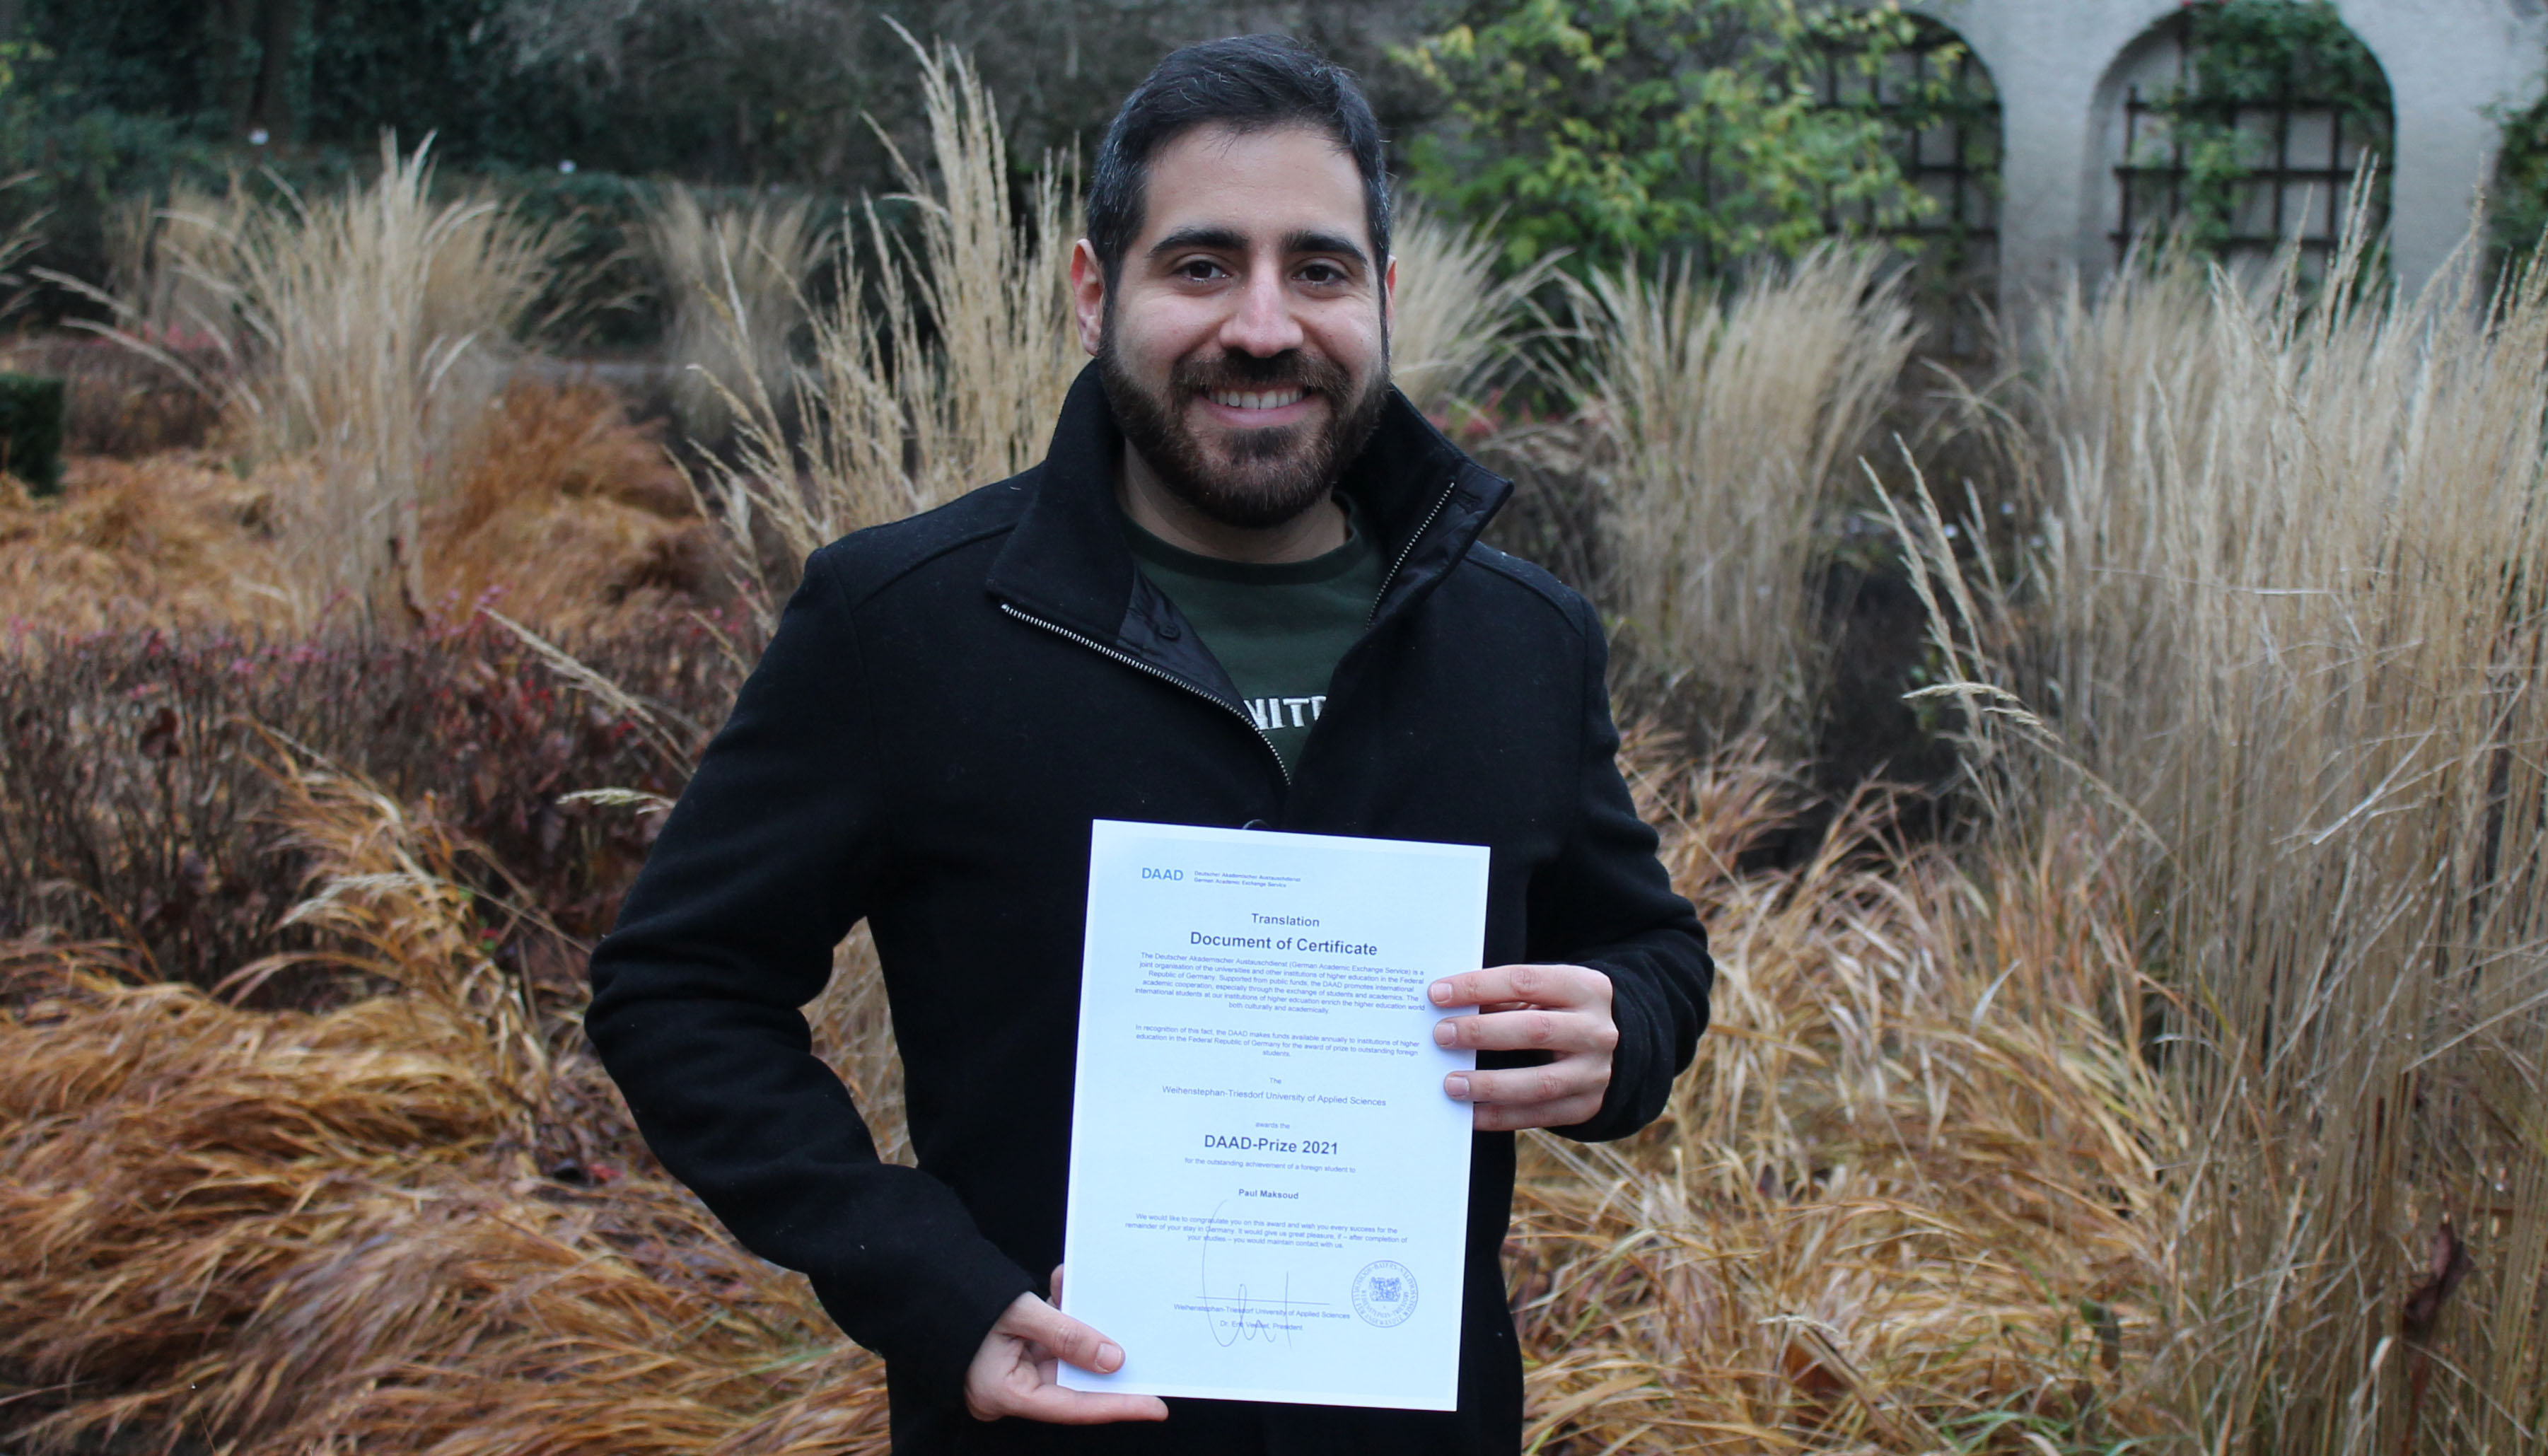 Photo in the garden, background shrub. Paul Maksoud with certificate.